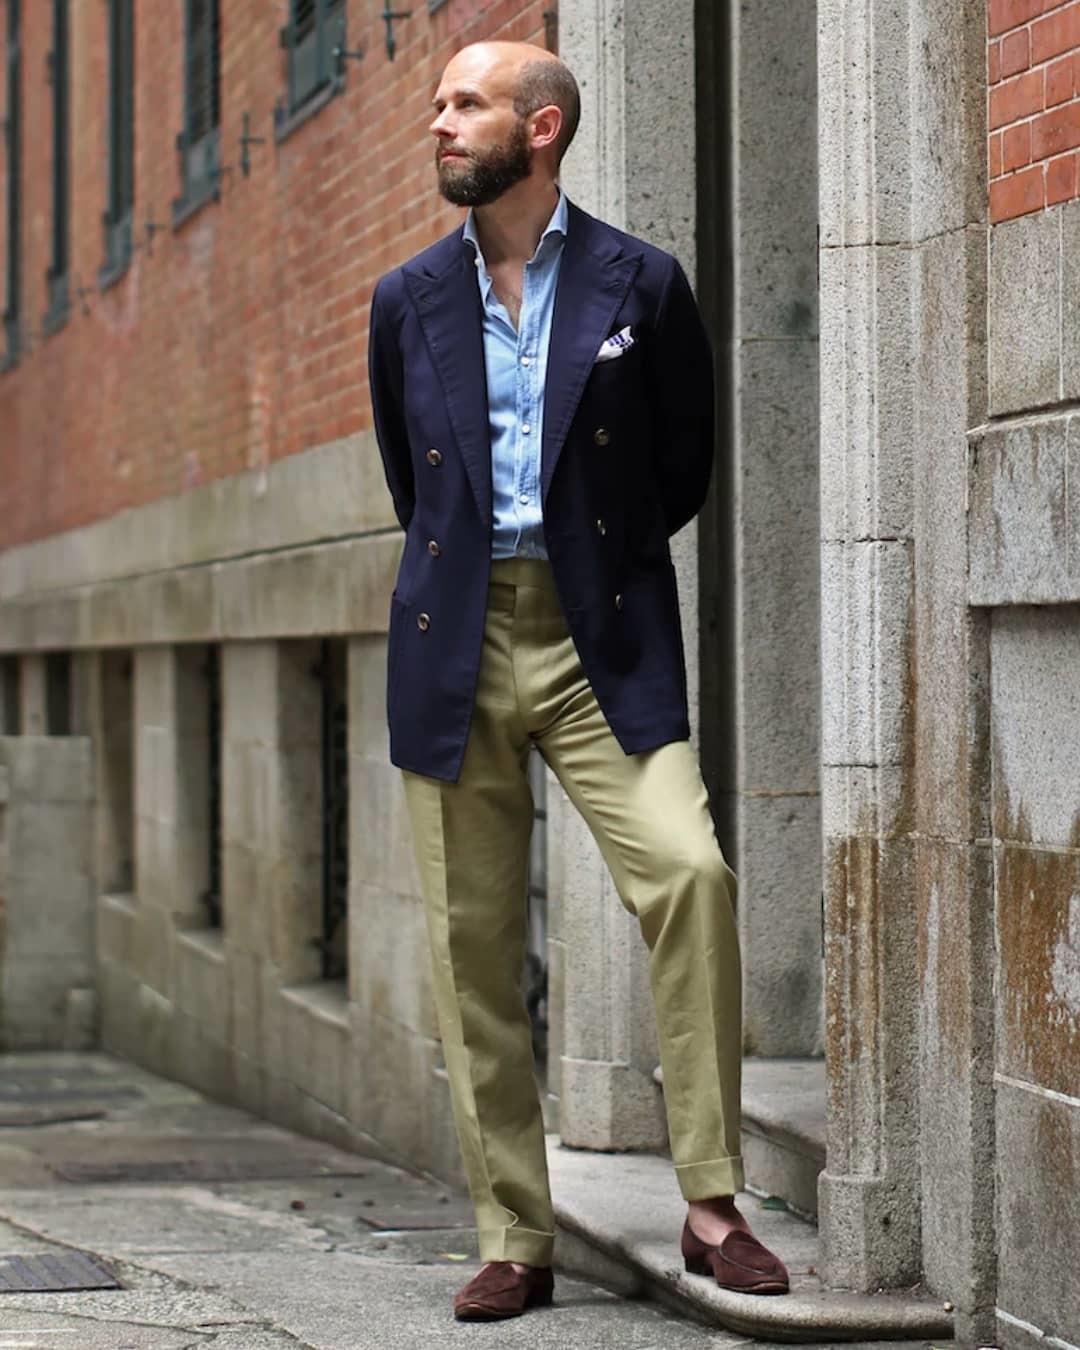 How To Pull Off Linen Trousers at Work - He Spoke Style | Blue blazer  outfit, Linen trousers, Linen pants suit